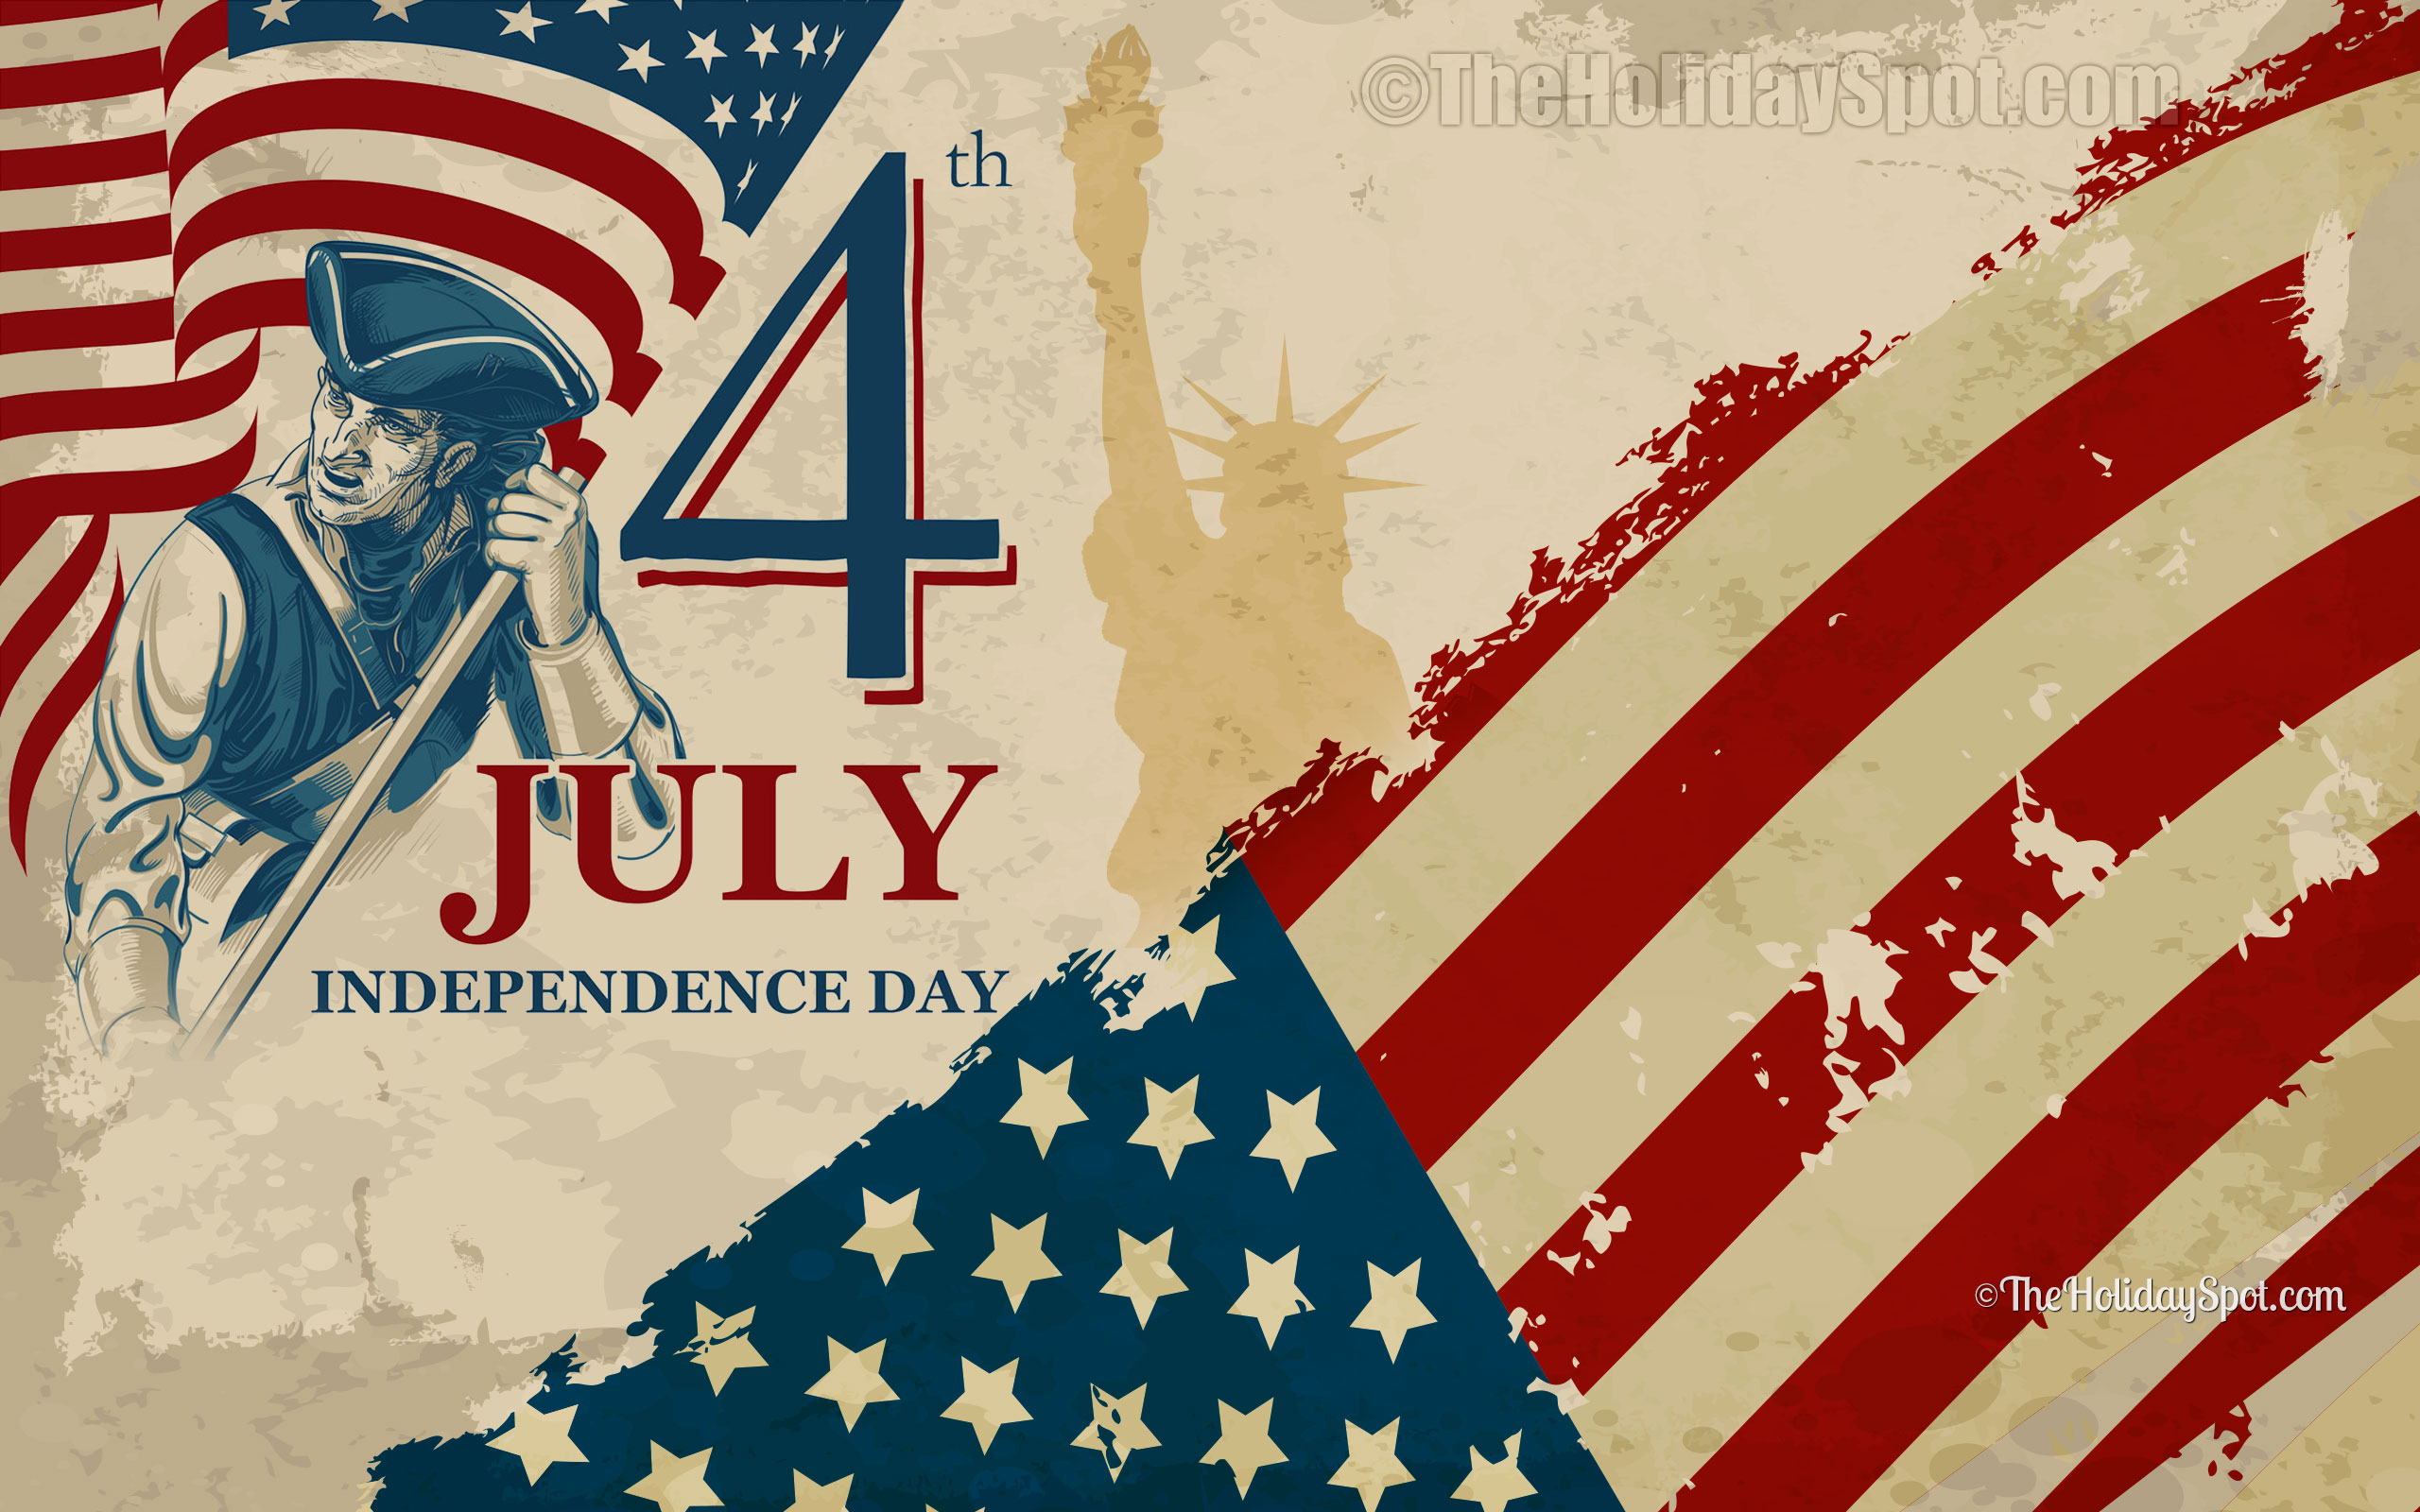 Wallpaper Cool July 4th decorations wallpapers Resolution 1024768  12801024 16001200 Widescreen Res 1440900 16801050 19201200